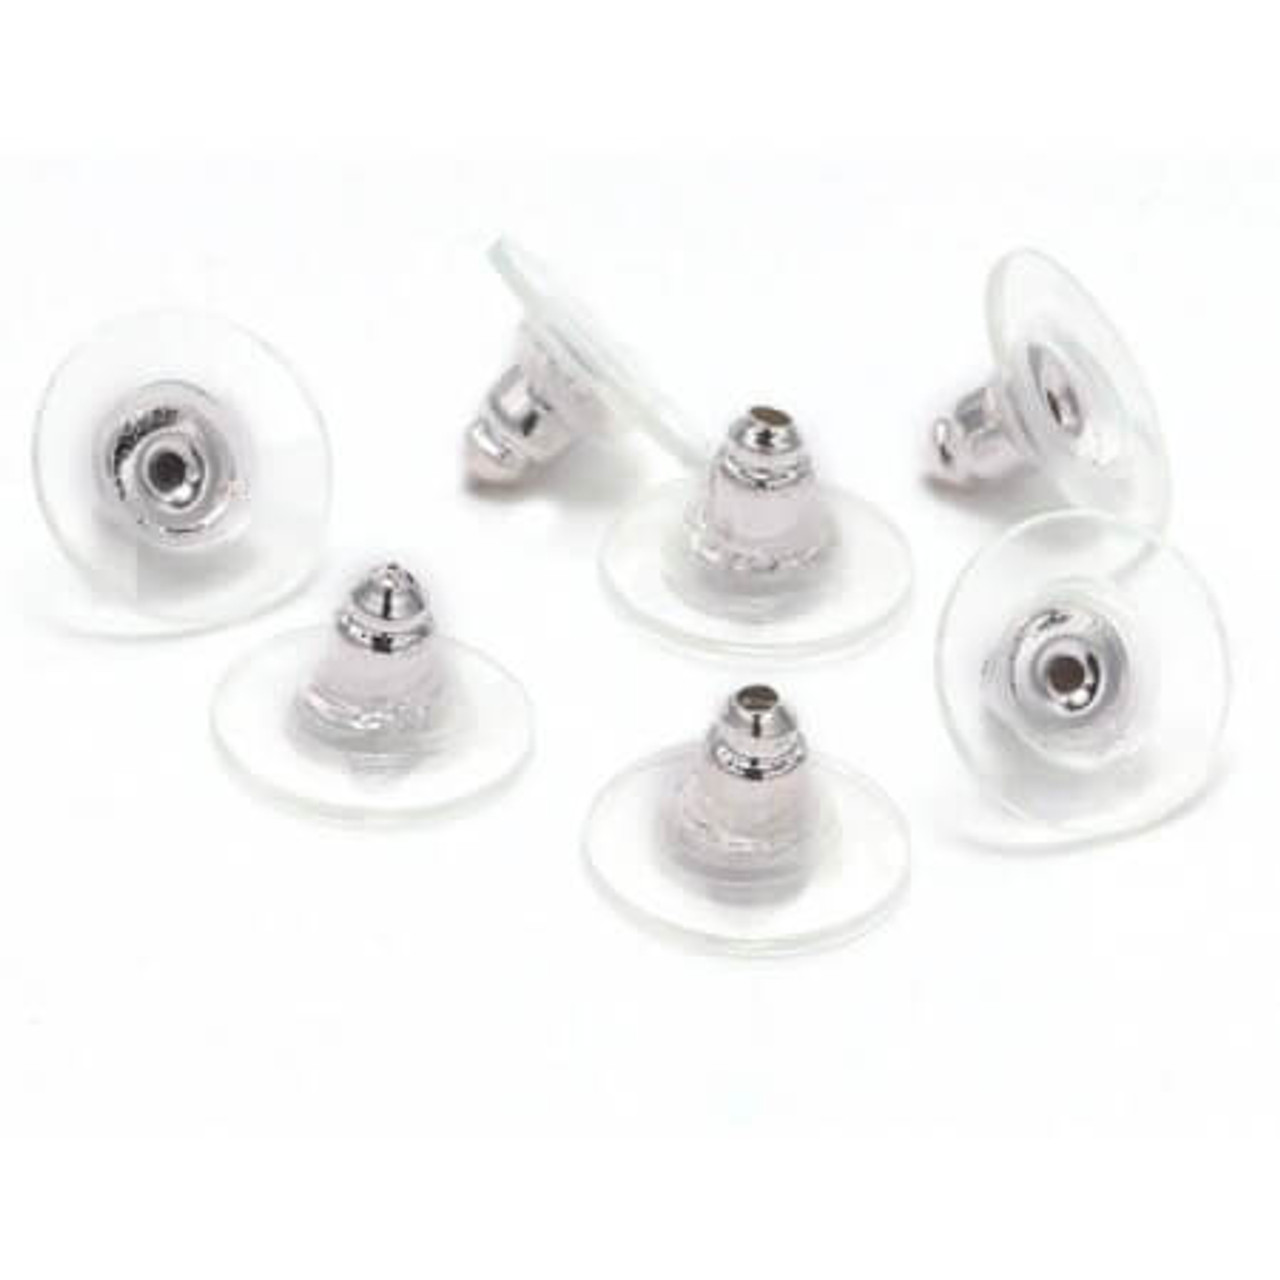 BULLET CLUTCH EARRING BACKS 6x11mm Silver Plated (Pack of 50 pairs)